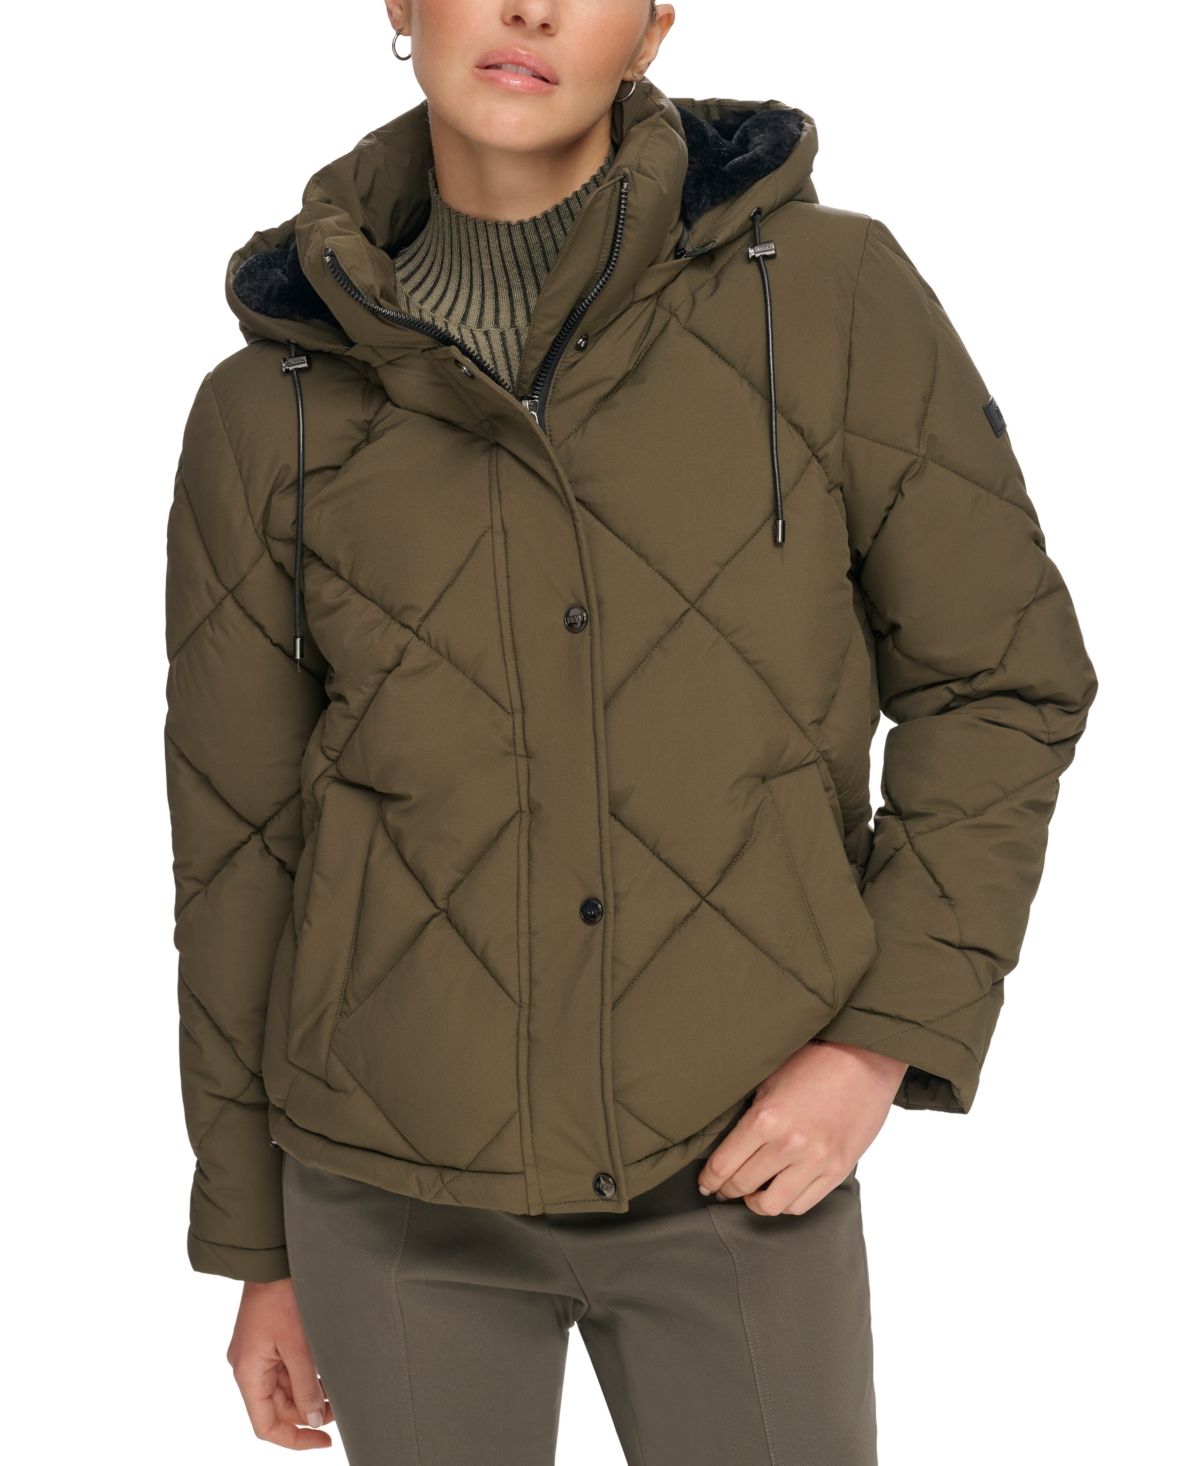 Dkny Women's Diamond Quilted Hooded Puffer Coat In Loden